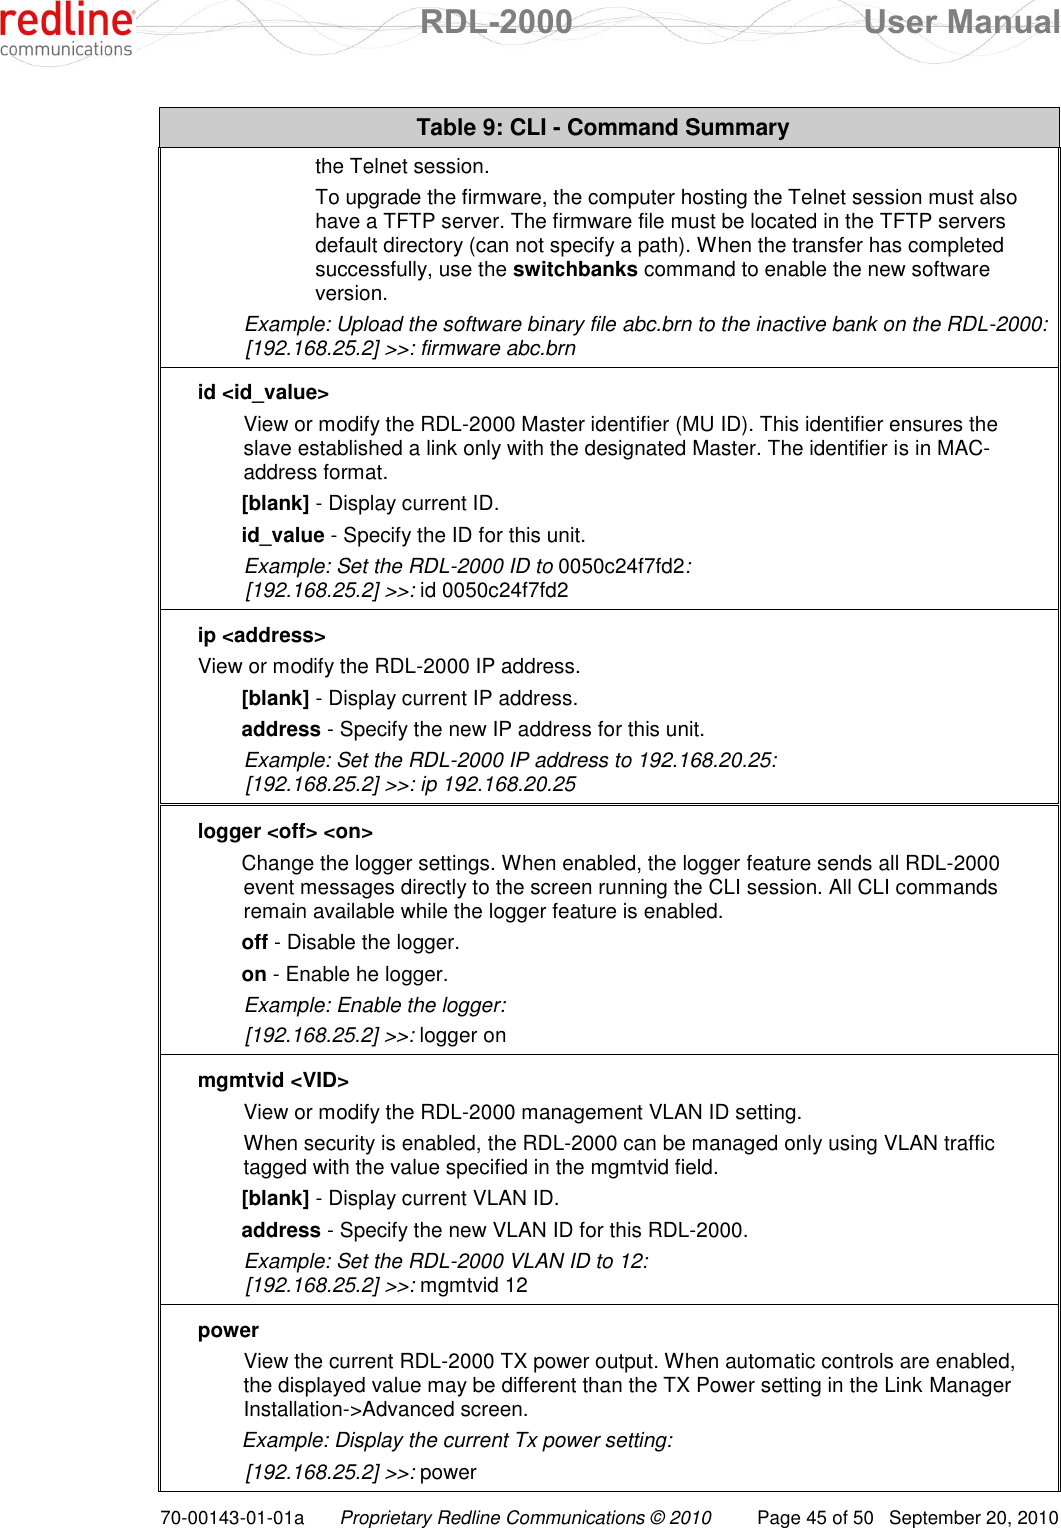  RDL-2000  User Manual 70-00143-01-01a Proprietary Redline Communications © 2010  Page 45 of 50  September 20, 2010 Table 9: CLI - Command Summary the Telnet session.   To upgrade the firmware, the computer hosting the Telnet session must also have a TFTP server. The firmware file must be located in the TFTP servers default directory (can not specify a path). When the transfer has completed successfully, use the switchbanks command to enable the new software version.  Example: Upload the software binary file abc.brn to the inactive bank on the RDL-2000:   [192.168.25.2] &gt;&gt;: firmware abc.brn id &lt;id_value&gt; View or modify the RDL-2000 Master identifier (MU ID). This identifier ensures the slave established a link only with the designated Master. The identifier is in MAC-address format. [blank] - Display current ID. id_value - Specify the ID for this unit. Example: Set the RDL-2000 ID to 0050c24f7fd2:  [192.168.25.2] &gt;&gt;: id 0050c24f7fd2 ip &lt;address&gt; View or modify the RDL-2000 IP address. [blank] - Display current IP address. address - Specify the new IP address for this unit. Example: Set the RDL-2000 IP address to 192.168.20.25:   [192.168.25.2] &gt;&gt;: ip 192.168.20.25 logger &lt;off&gt; &lt;on&gt; Change the logger settings. When enabled, the logger feature sends all RDL-2000 event messages directly to the screen running the CLI session. All CLI commands remain available while the logger feature is enabled. off - Disable the logger. on - Enable he logger. Example: Enable the logger:  [192.168.25.2] &gt;&gt;: logger on mgmtvid &lt;VID&gt; View or modify the RDL-2000 management VLAN ID setting.  When security is enabled, the RDL-2000 can be managed only using VLAN traffic tagged with the value specified in the mgmtvid field.  [blank] - Display current VLAN ID. address - Specify the new VLAN ID for this RDL-2000. Example: Set the RDL-2000 VLAN ID to 12:  [192.168.25.2] &gt;&gt;: mgmtvid 12 power View the current RDL-2000 TX power output. When automatic controls are enabled, the displayed value may be different than the TX Power setting in the Link Manager Installation-&gt;Advanced screen. Example: Display the current Tx power setting:  [192.168.25.2] &gt;&gt;: power 